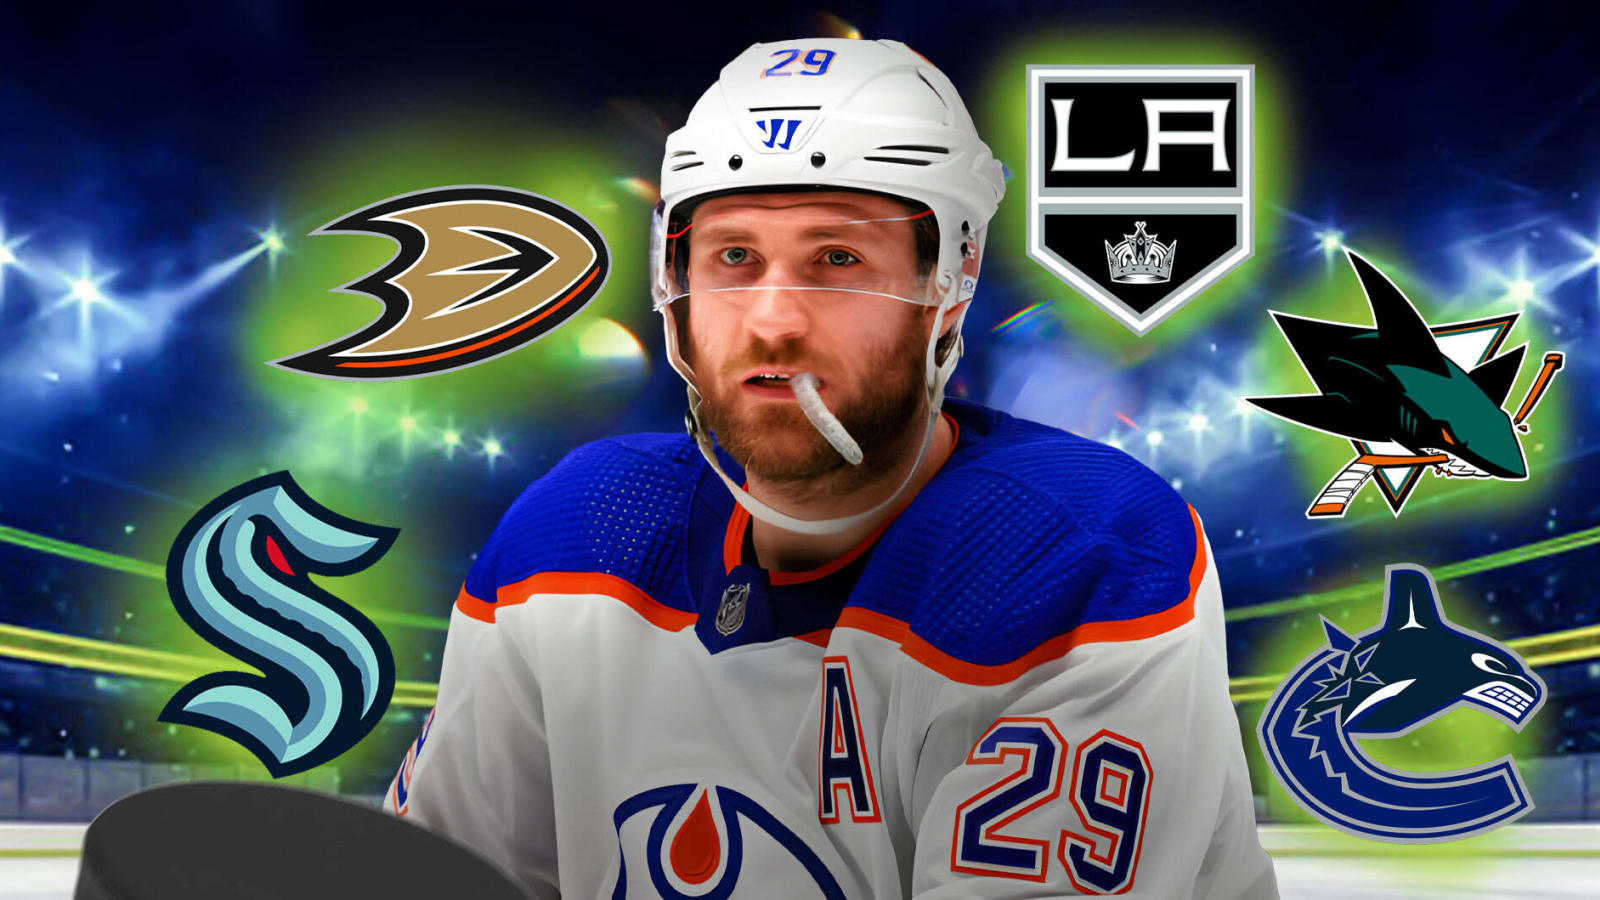  Leon Draisaitl shockingly linked to West Coast team in 2025